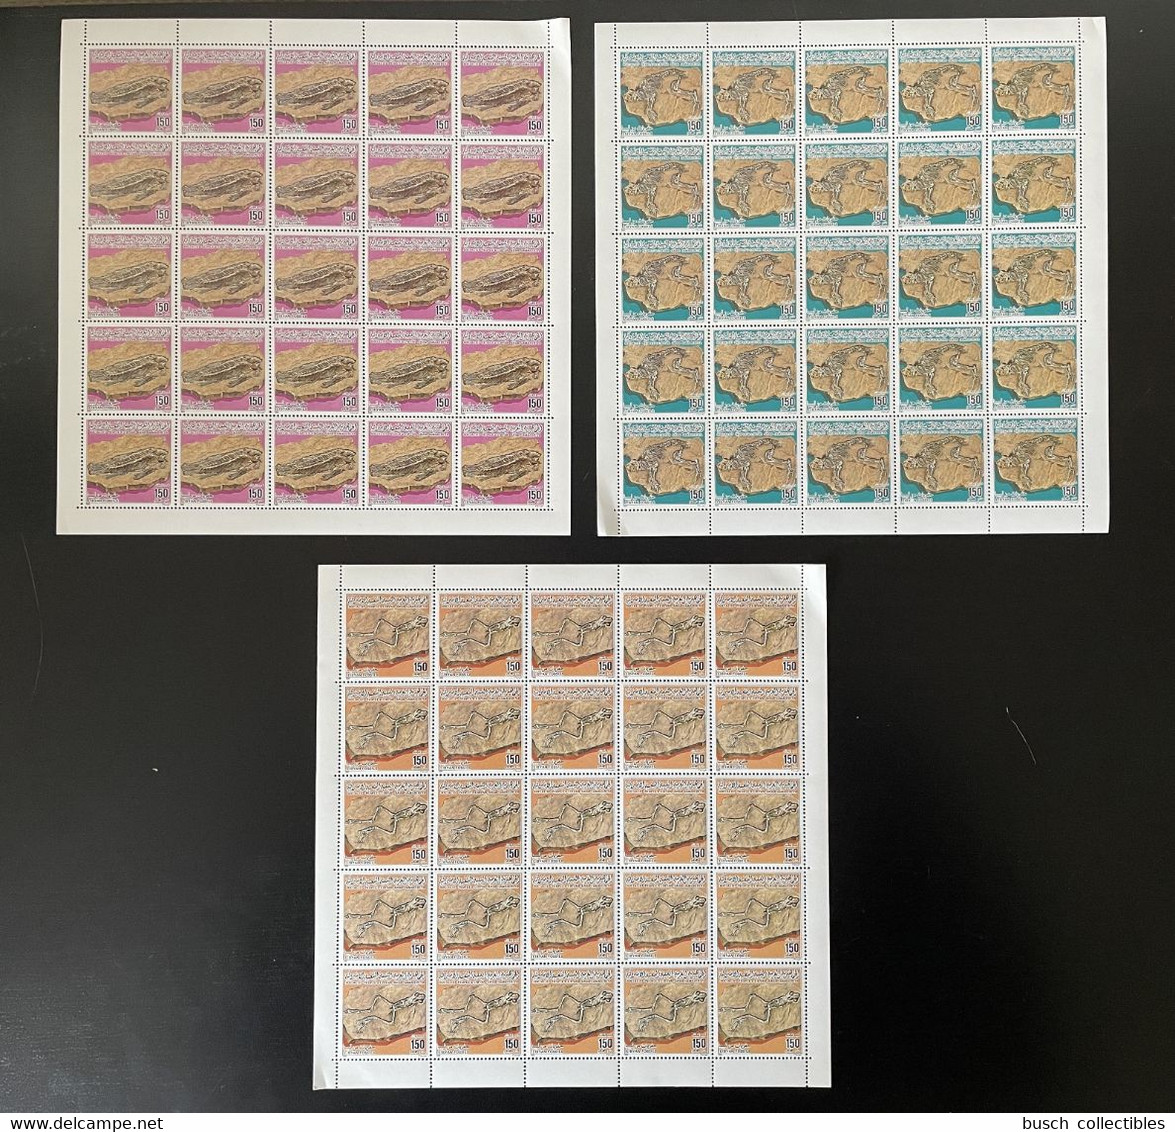 Libye Libya 1985 Mi. 1478 - 1480 Libyan Fossils Fossilien Fossiles Full Sheets Of 25 Stamps RARE SCARCE - Archéologie